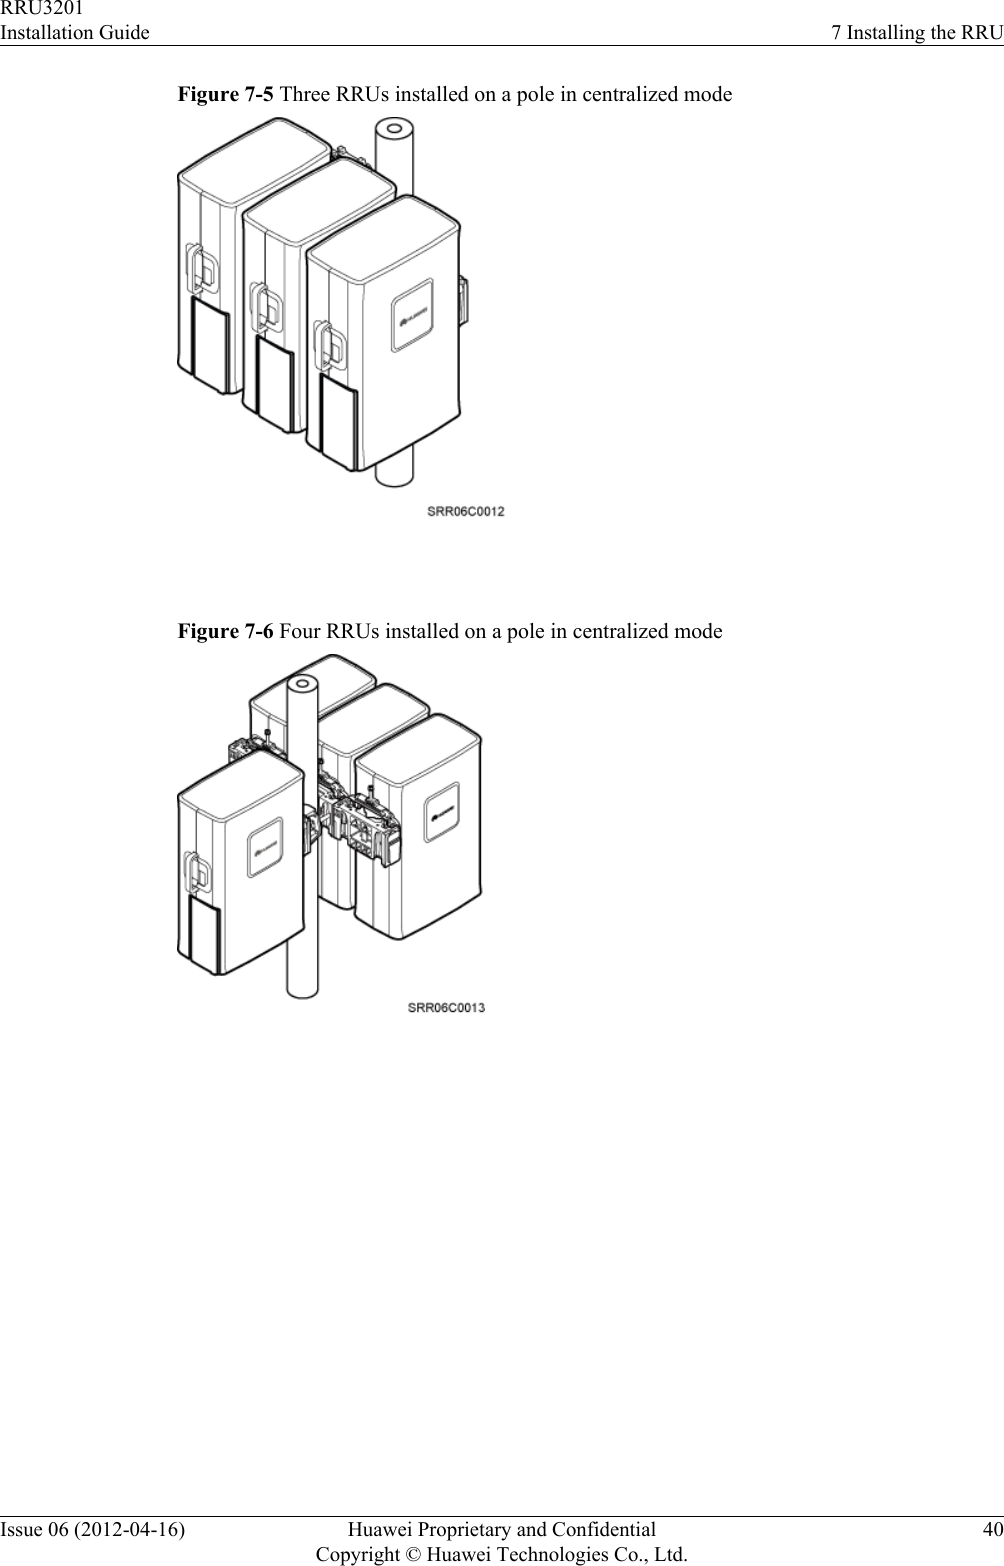 Figure 7-5 Three RRUs installed on a pole in centralized mode Figure 7-6 Four RRUs installed on a pole in centralized mode RRU3201Installation Guide 7 Installing the RRUIssue 06 (2012-04-16) Huawei Proprietary and ConfidentialCopyright © Huawei Technologies Co., Ltd.40